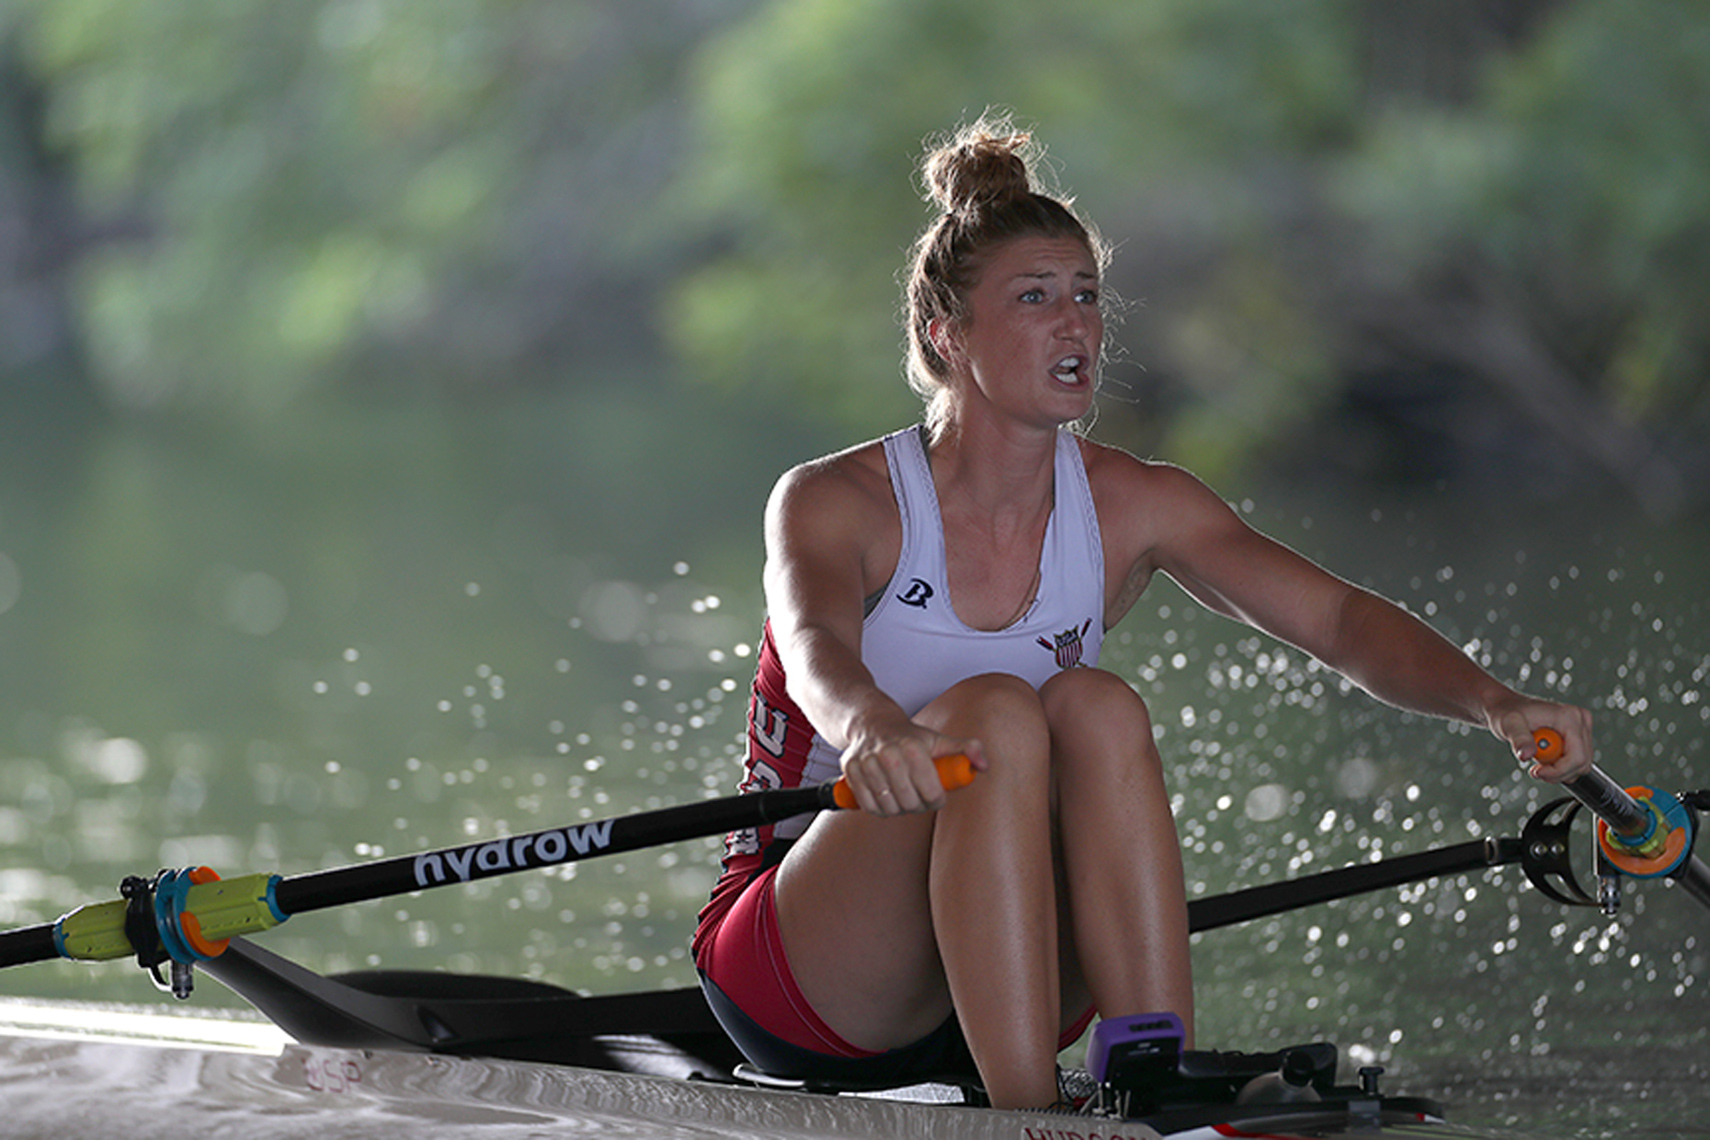 A rower makes her way down the Charles River in early morning light.